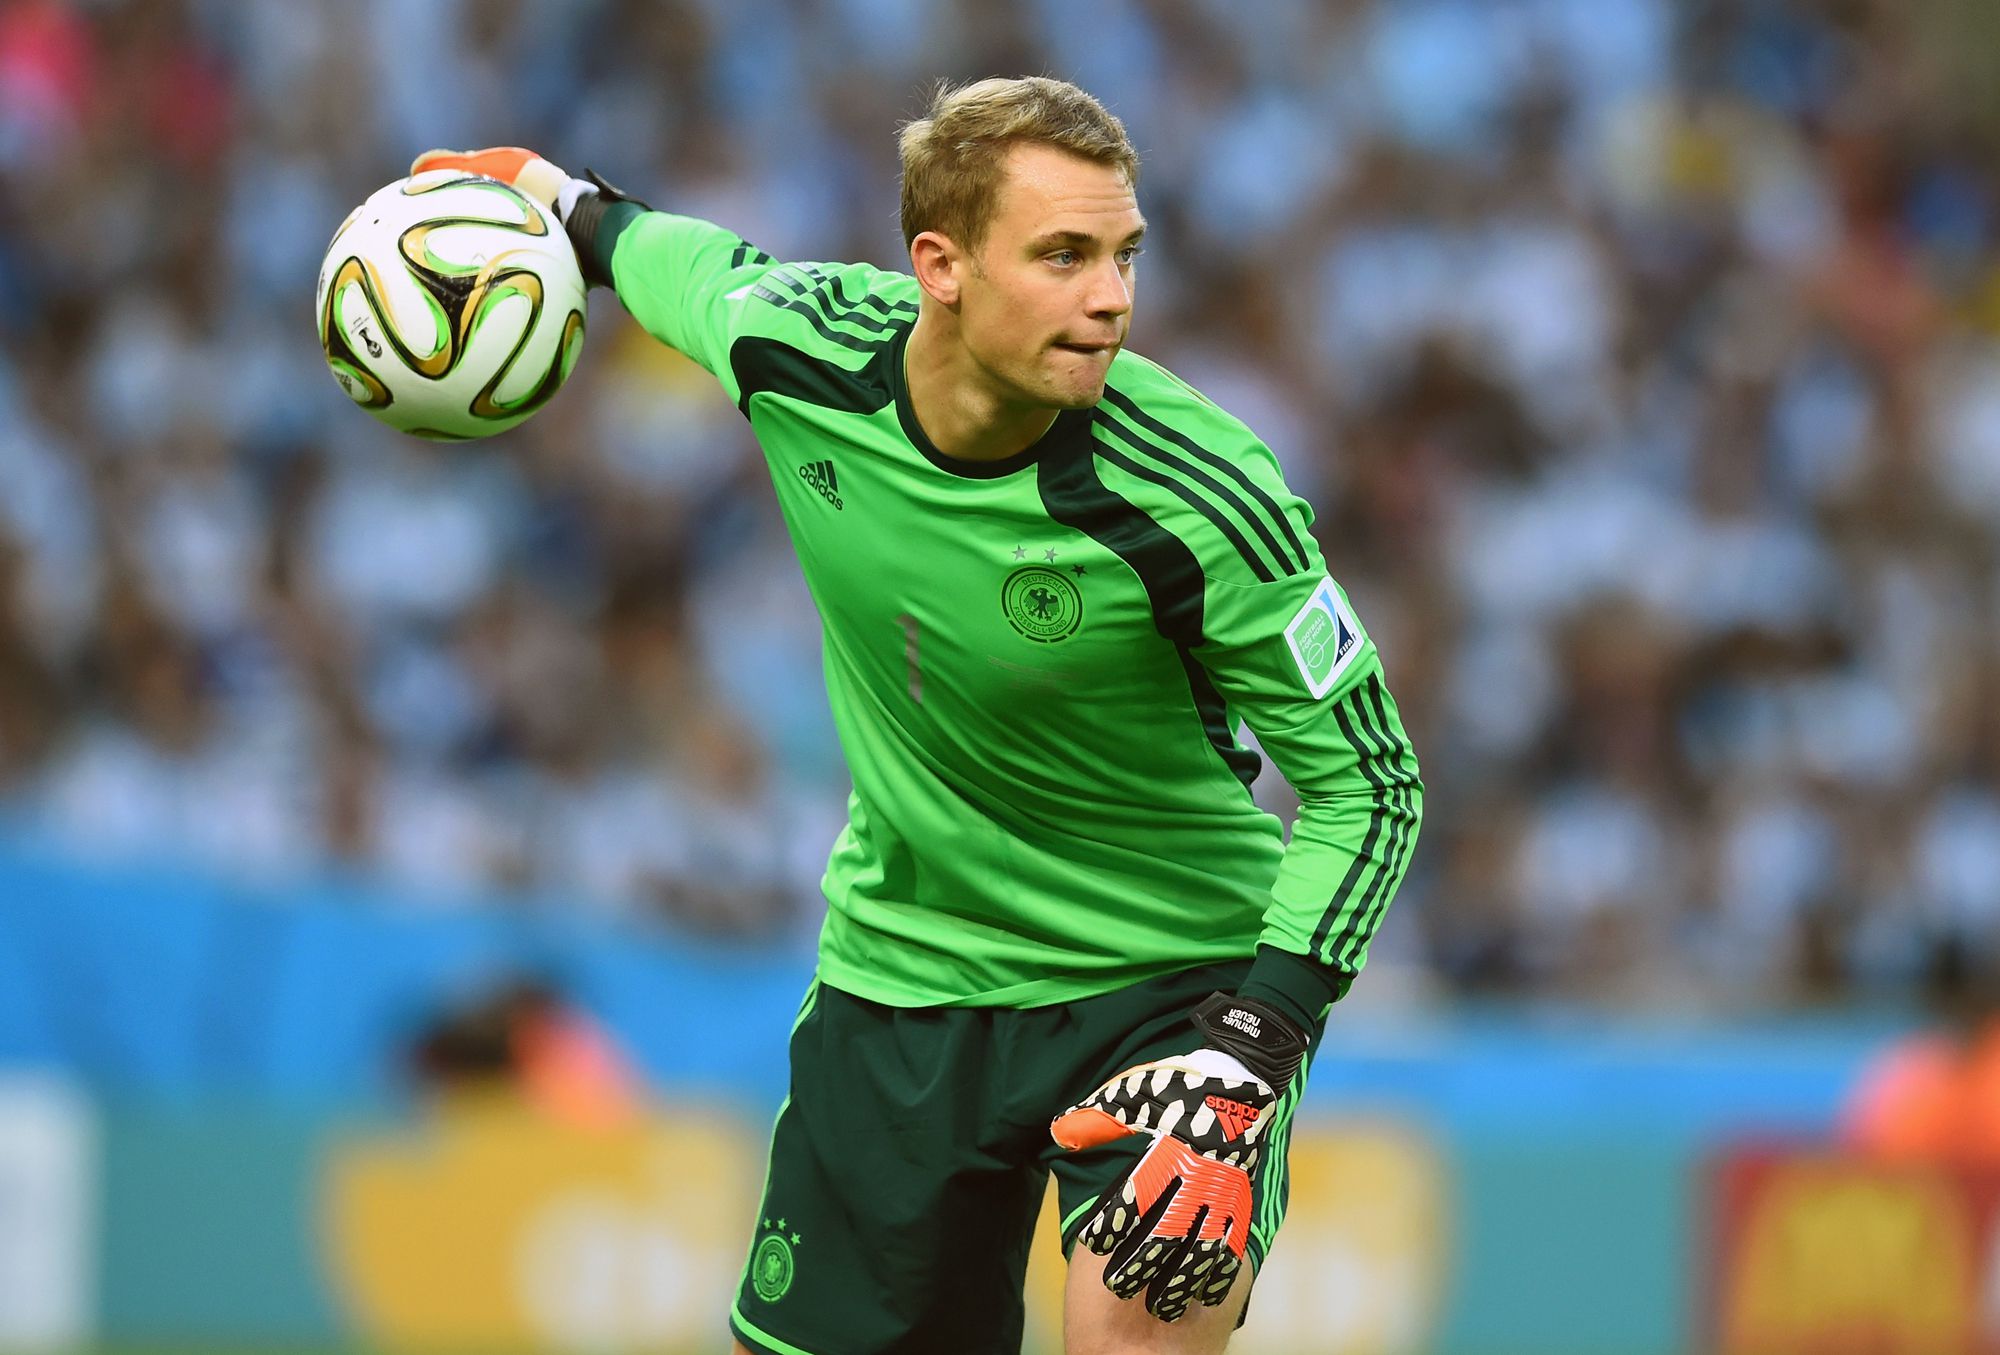 Ten of the Best Goalkeepers in the World